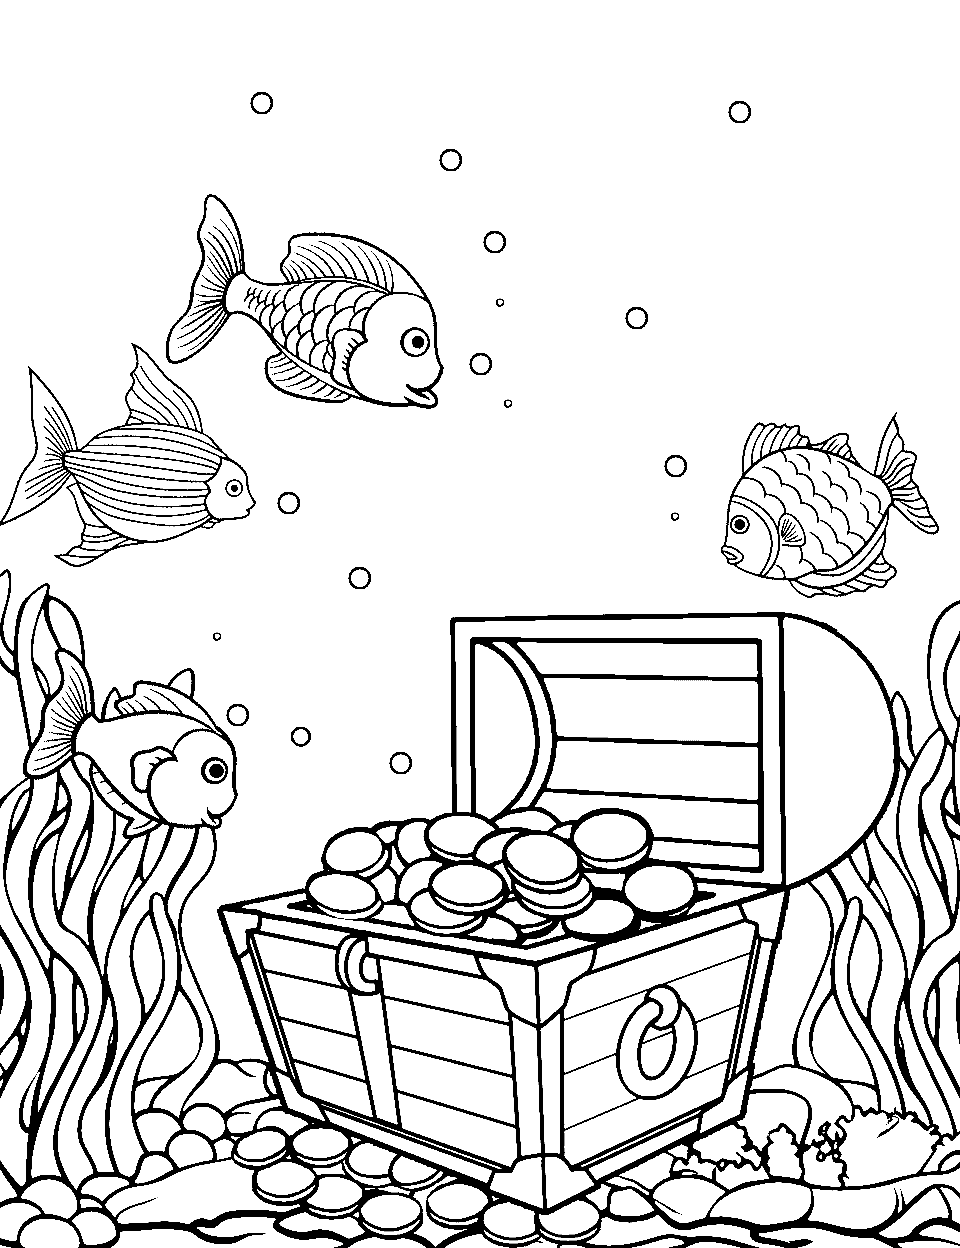 Treasure Chest Mystery Ocean Coloring Page - An open treasure chest on the sea bed, surrounded by curious fish.